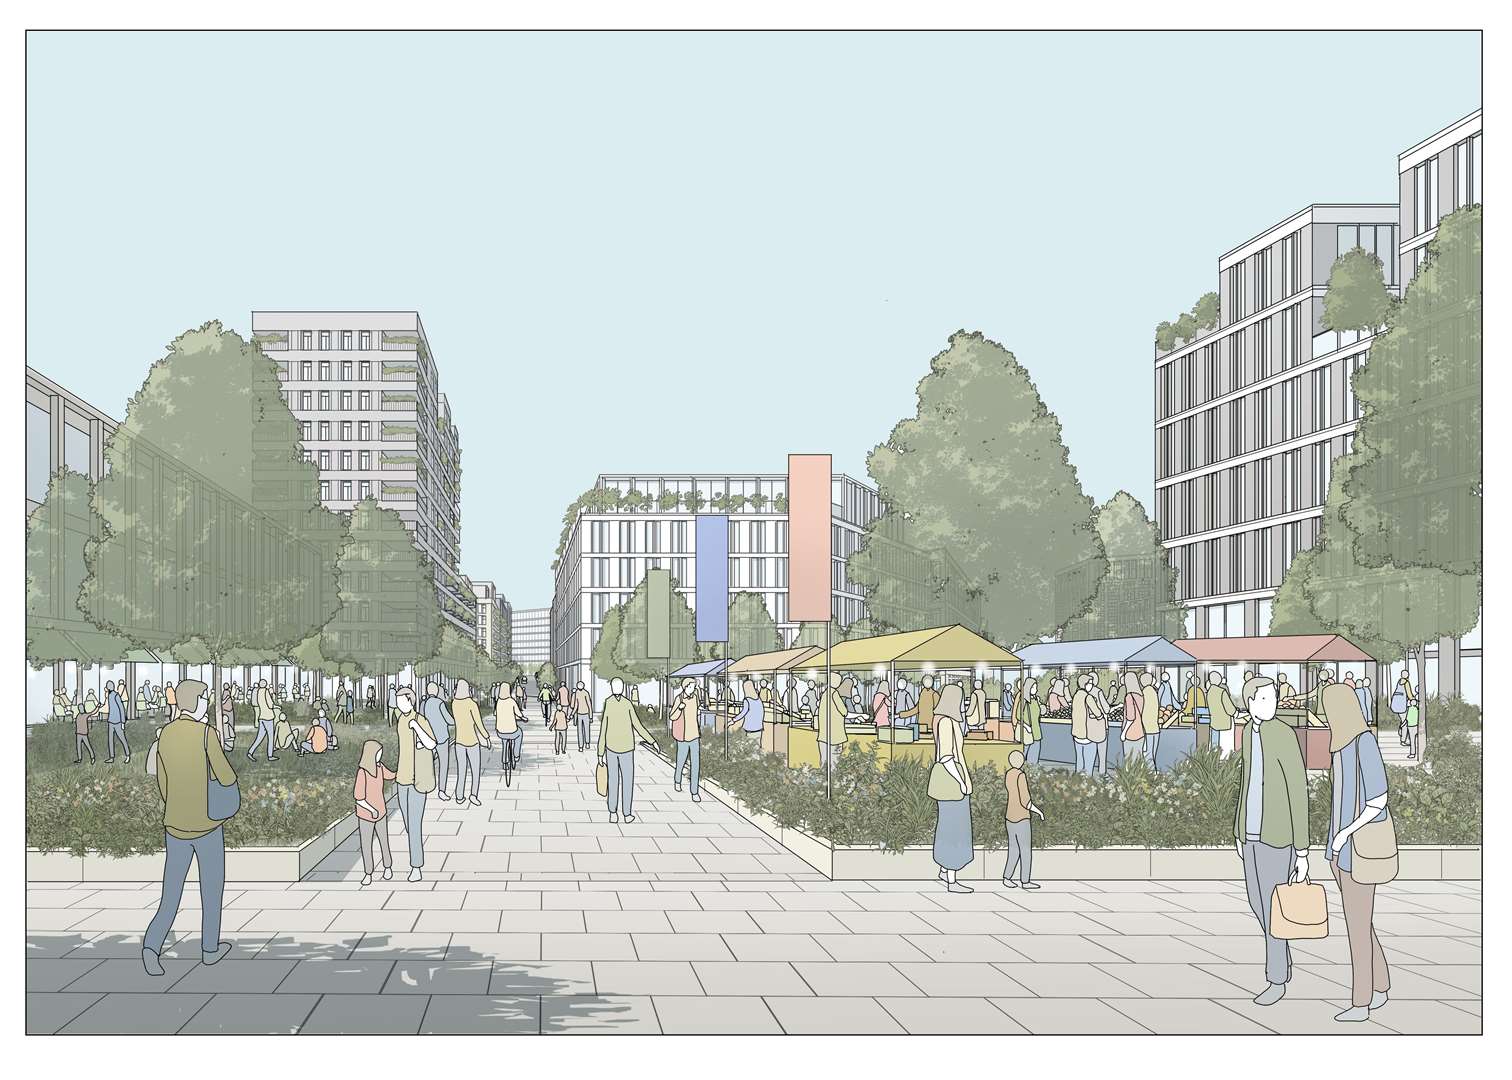 Plans unveiled for new garden city centre at Ebbsfleet with 2,100 homes and more than 110,000sq m of commercial, retail and community space